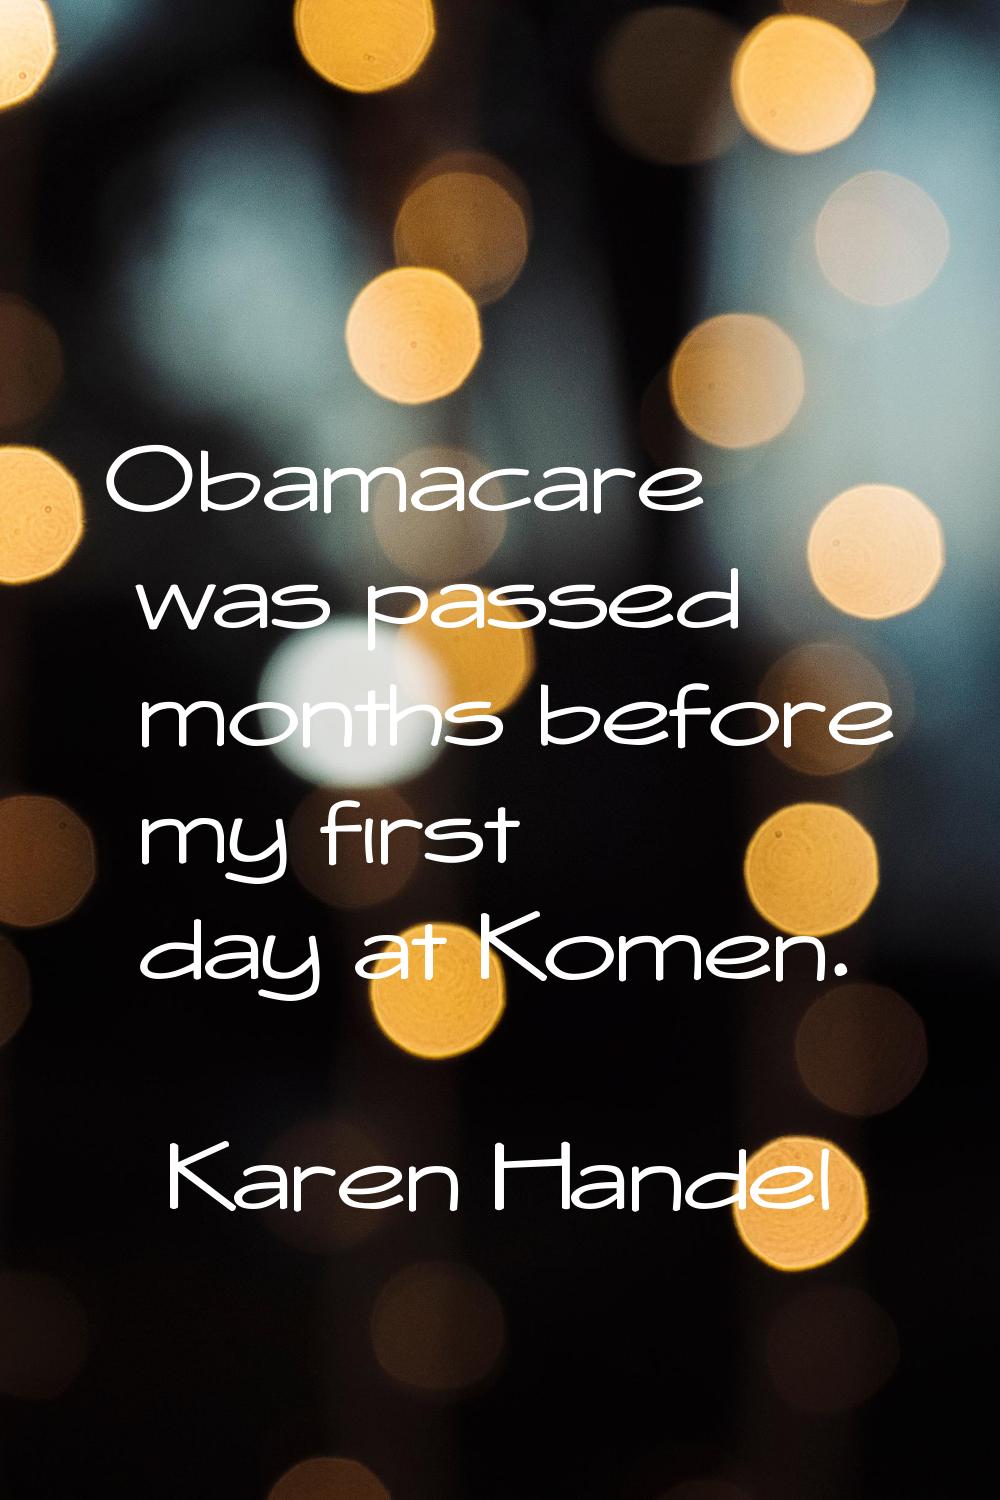 Obamacare was passed months before my first day at Komen.